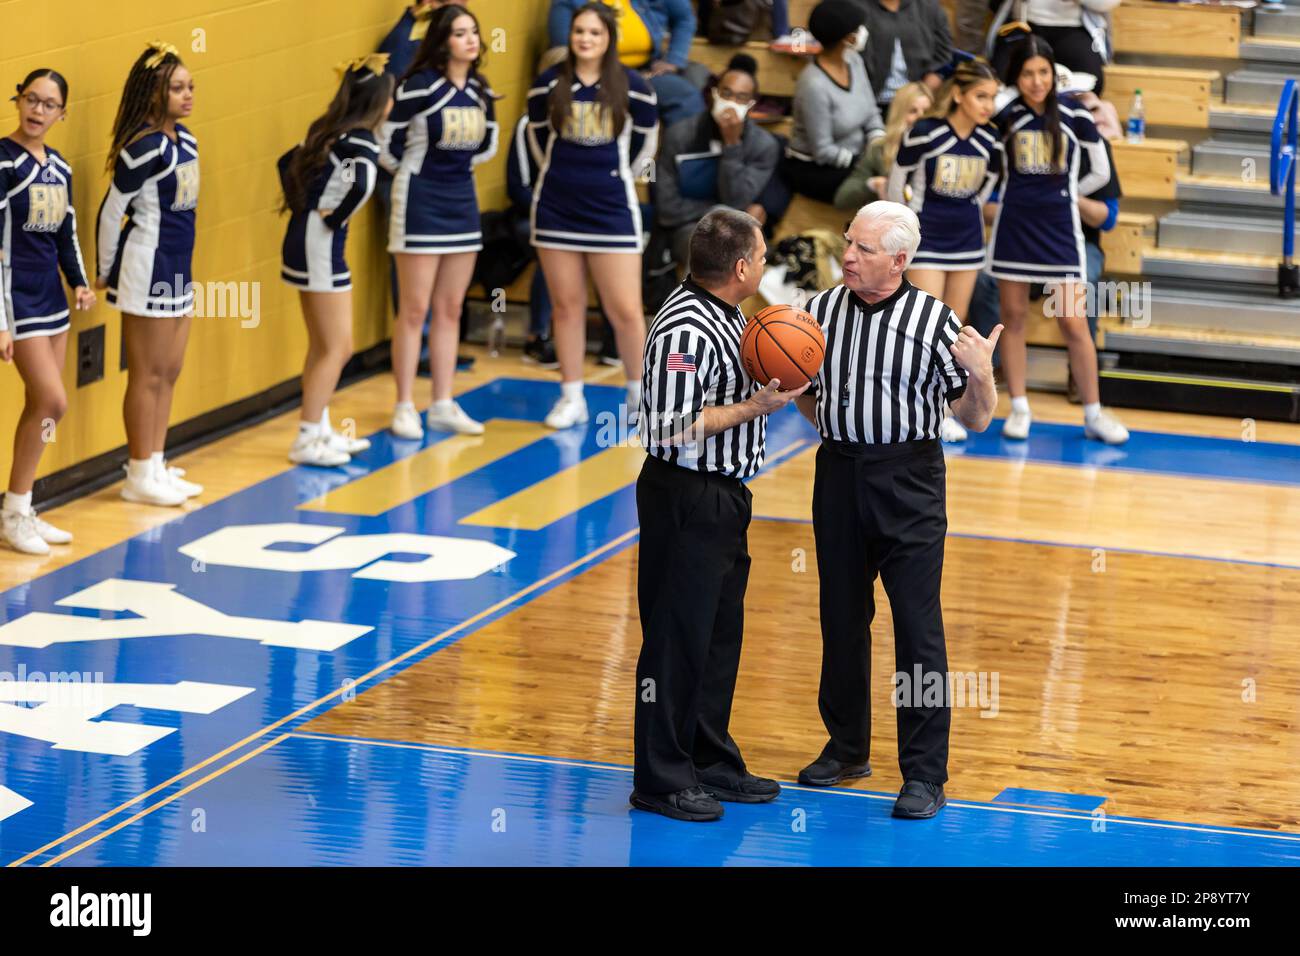 Two IHSAA officials confer on the court in front of the Hammond Noll cheerleaders during a game in the North Judson - San Pierre High School gymnasium. Stock Photo